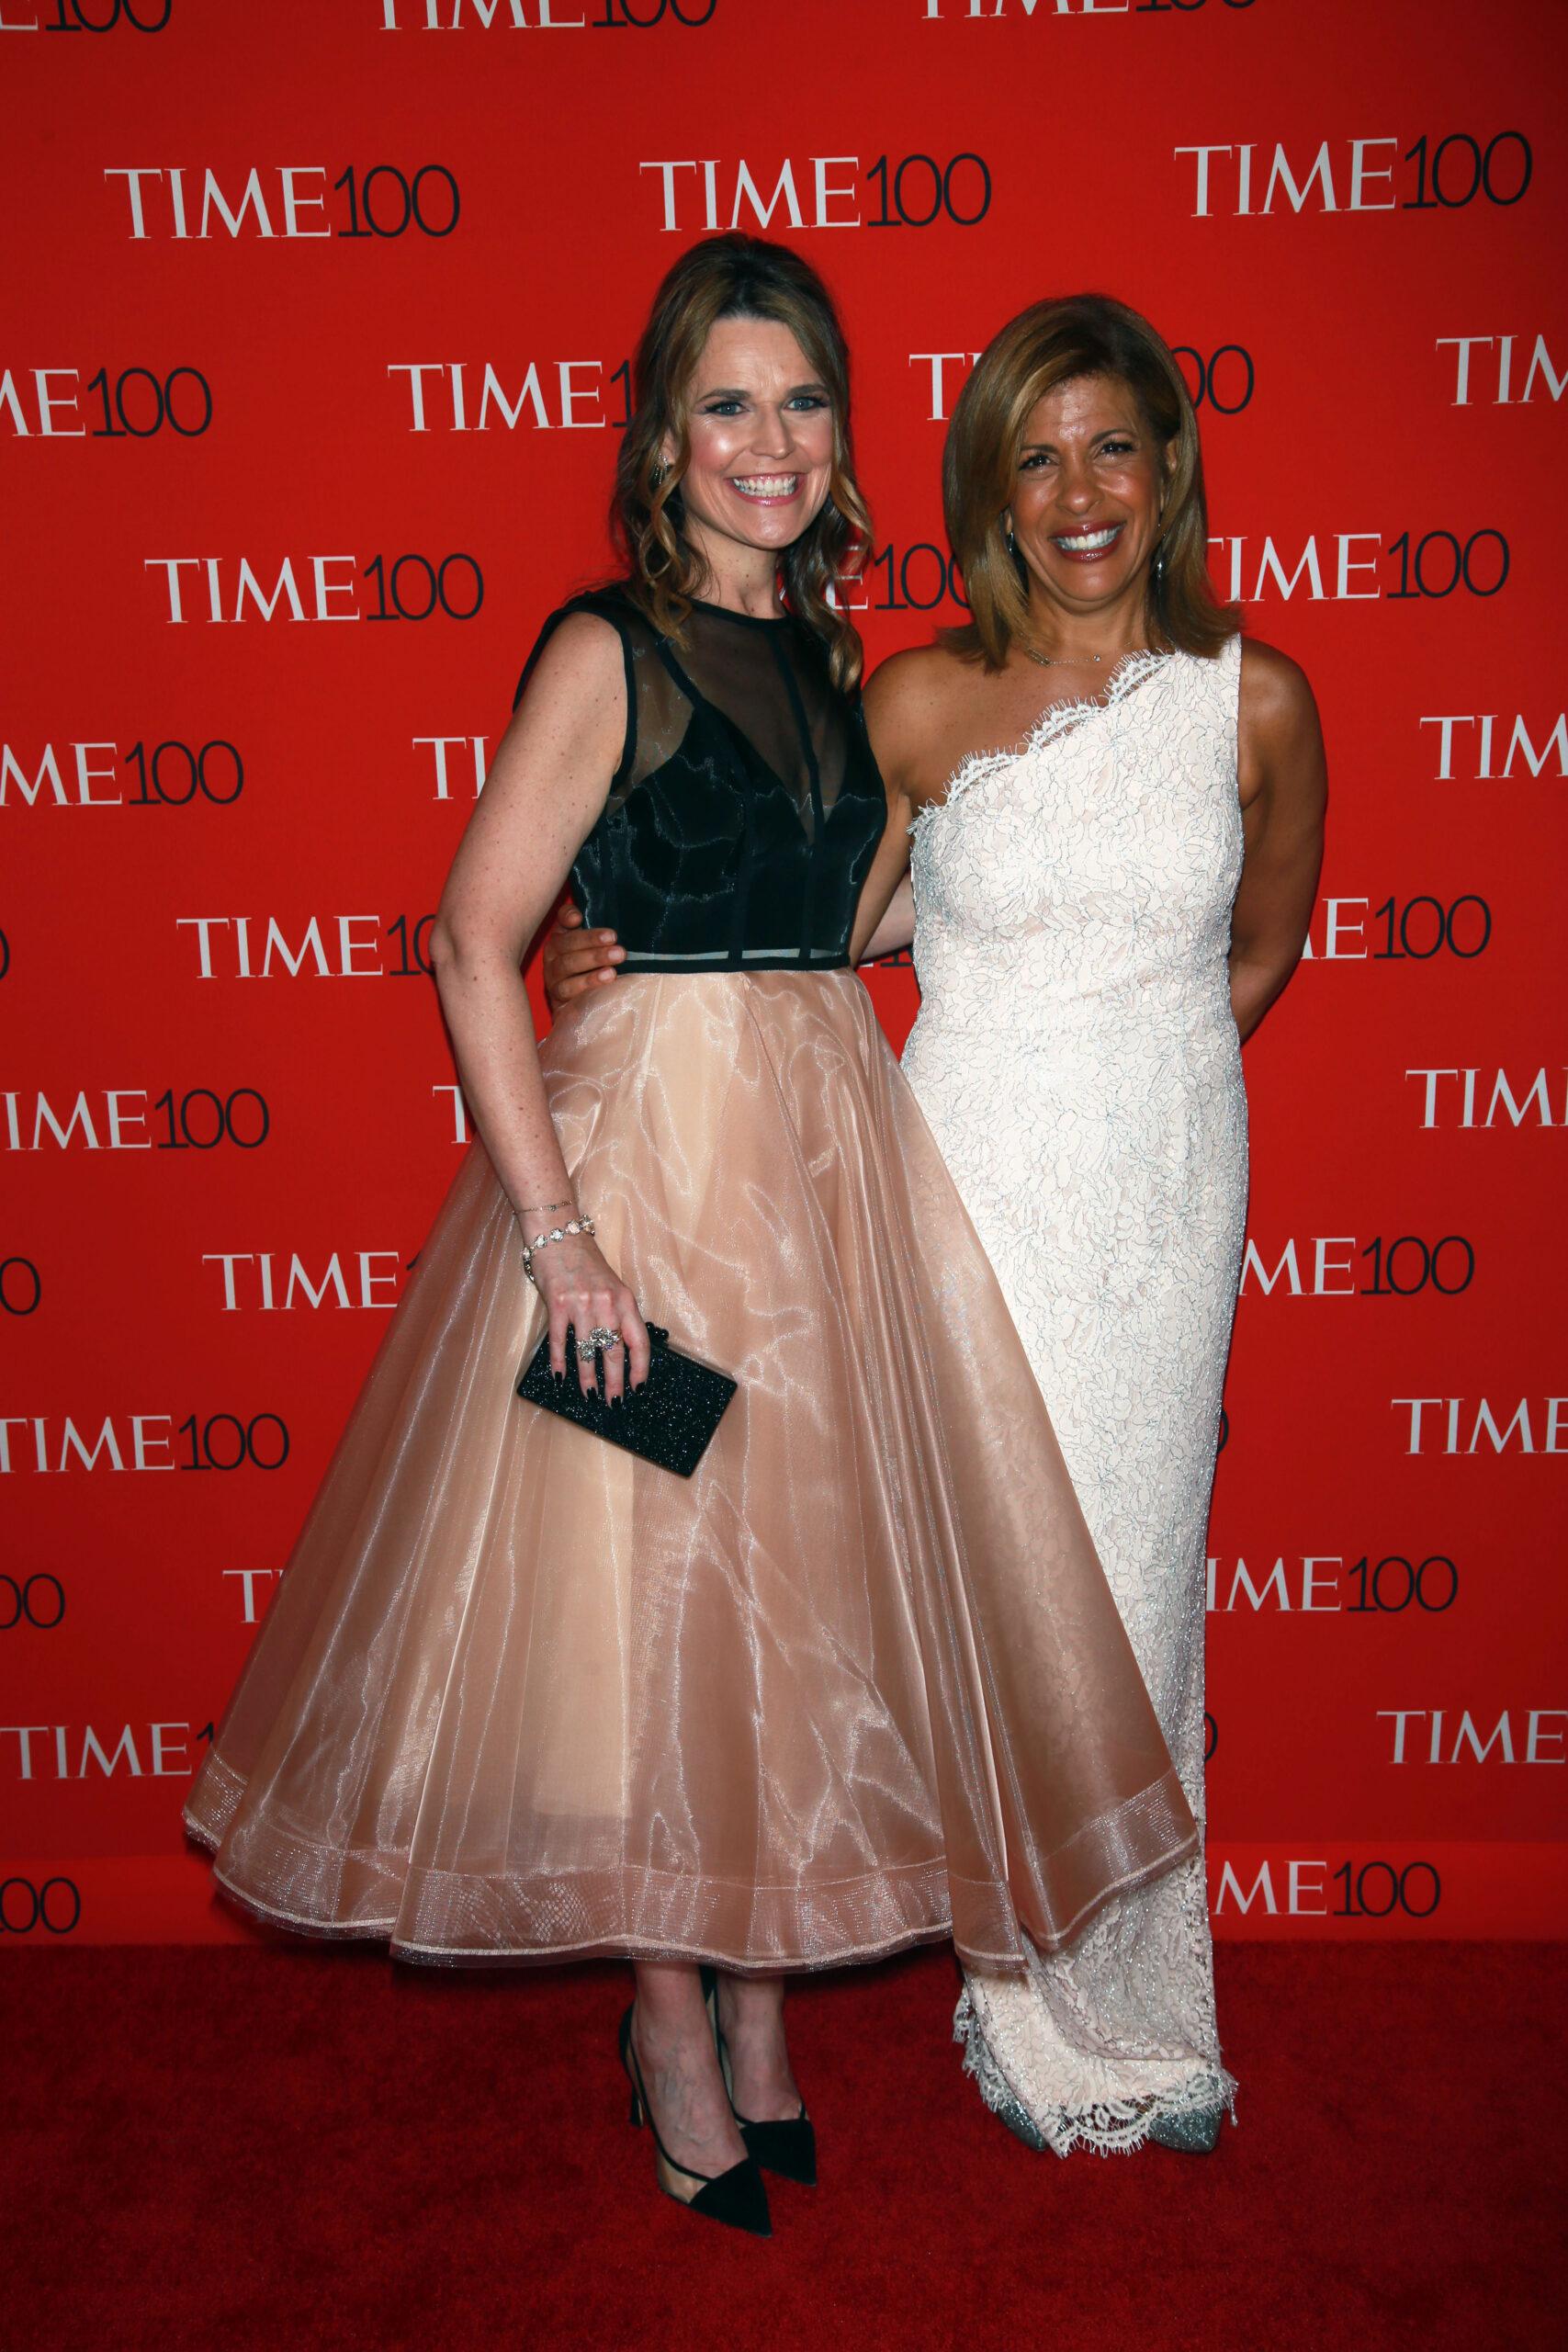 Time 100 Gala arrivals